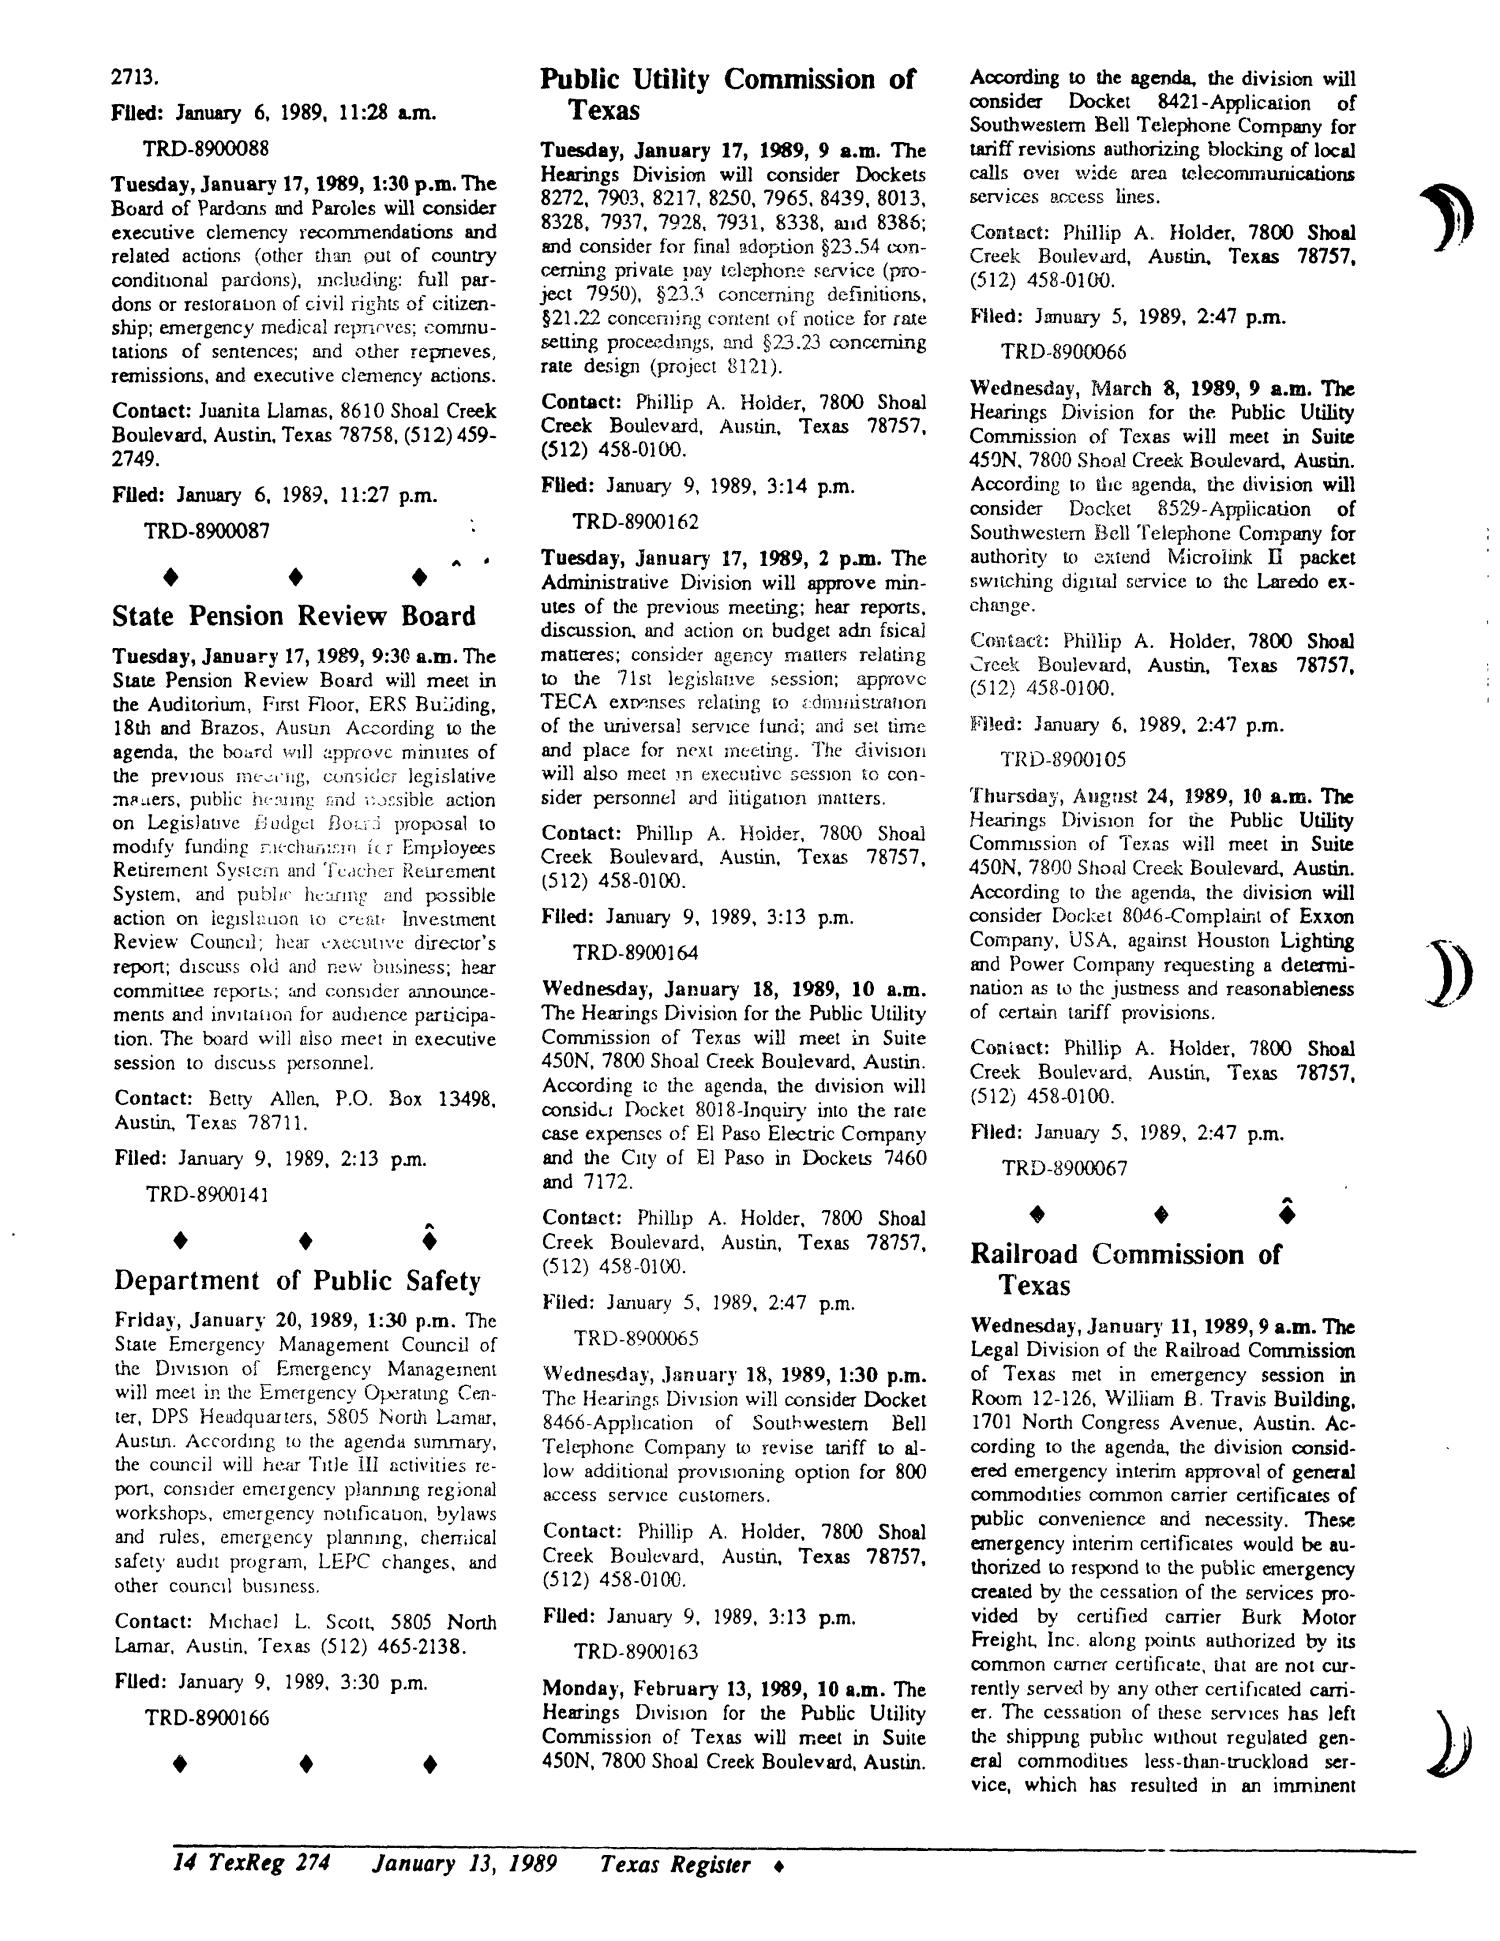 Texas Register, Volume 14, Number 4, Pages 235-293, January 13, 1989
                                                
                                                    274
                                                